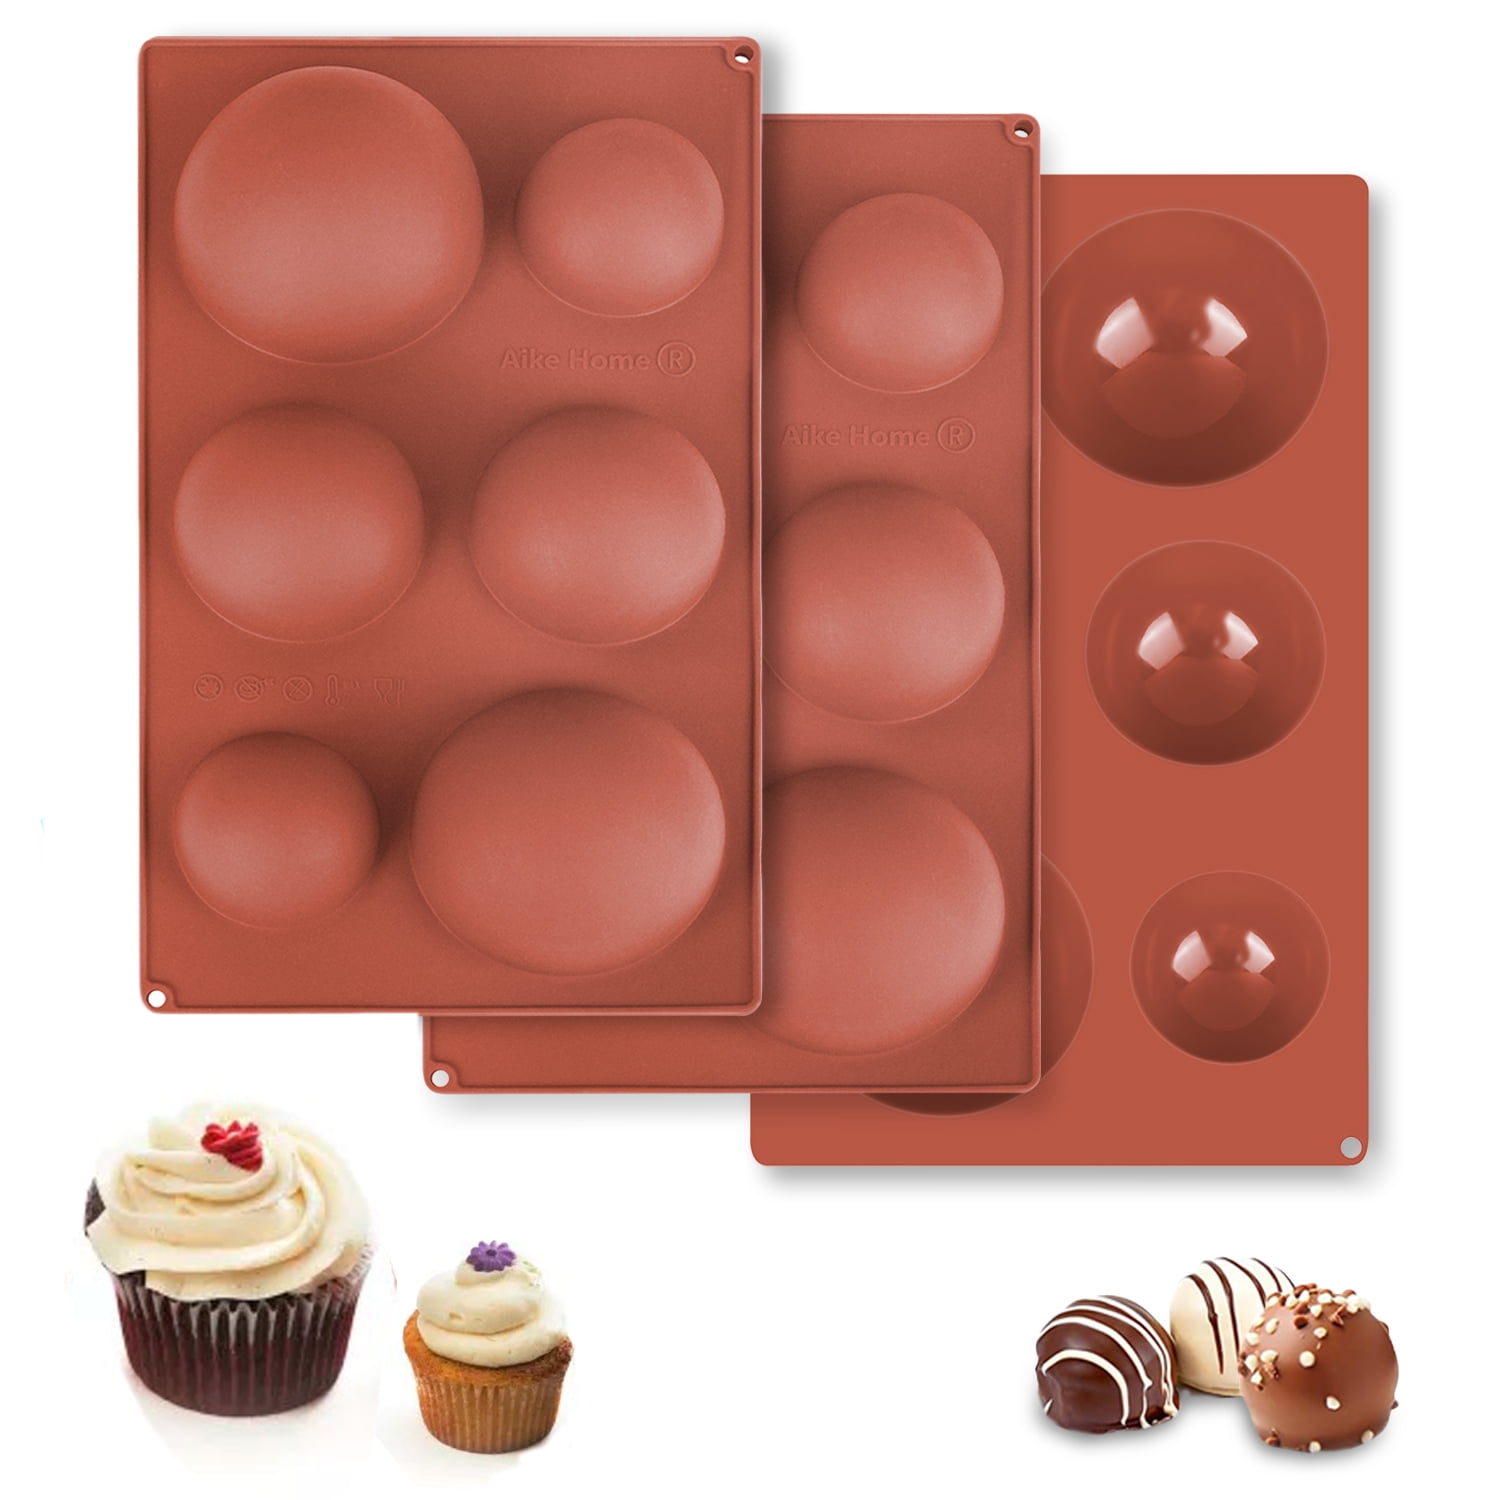 Handmade Soap,Fondant Jelly Cupcake,Chocolate Bakeware Kitchen Tools Semi Sphere Silicone Mold DIY Nonstick Cake Mold Pudding Baking Mold for DIY Baking